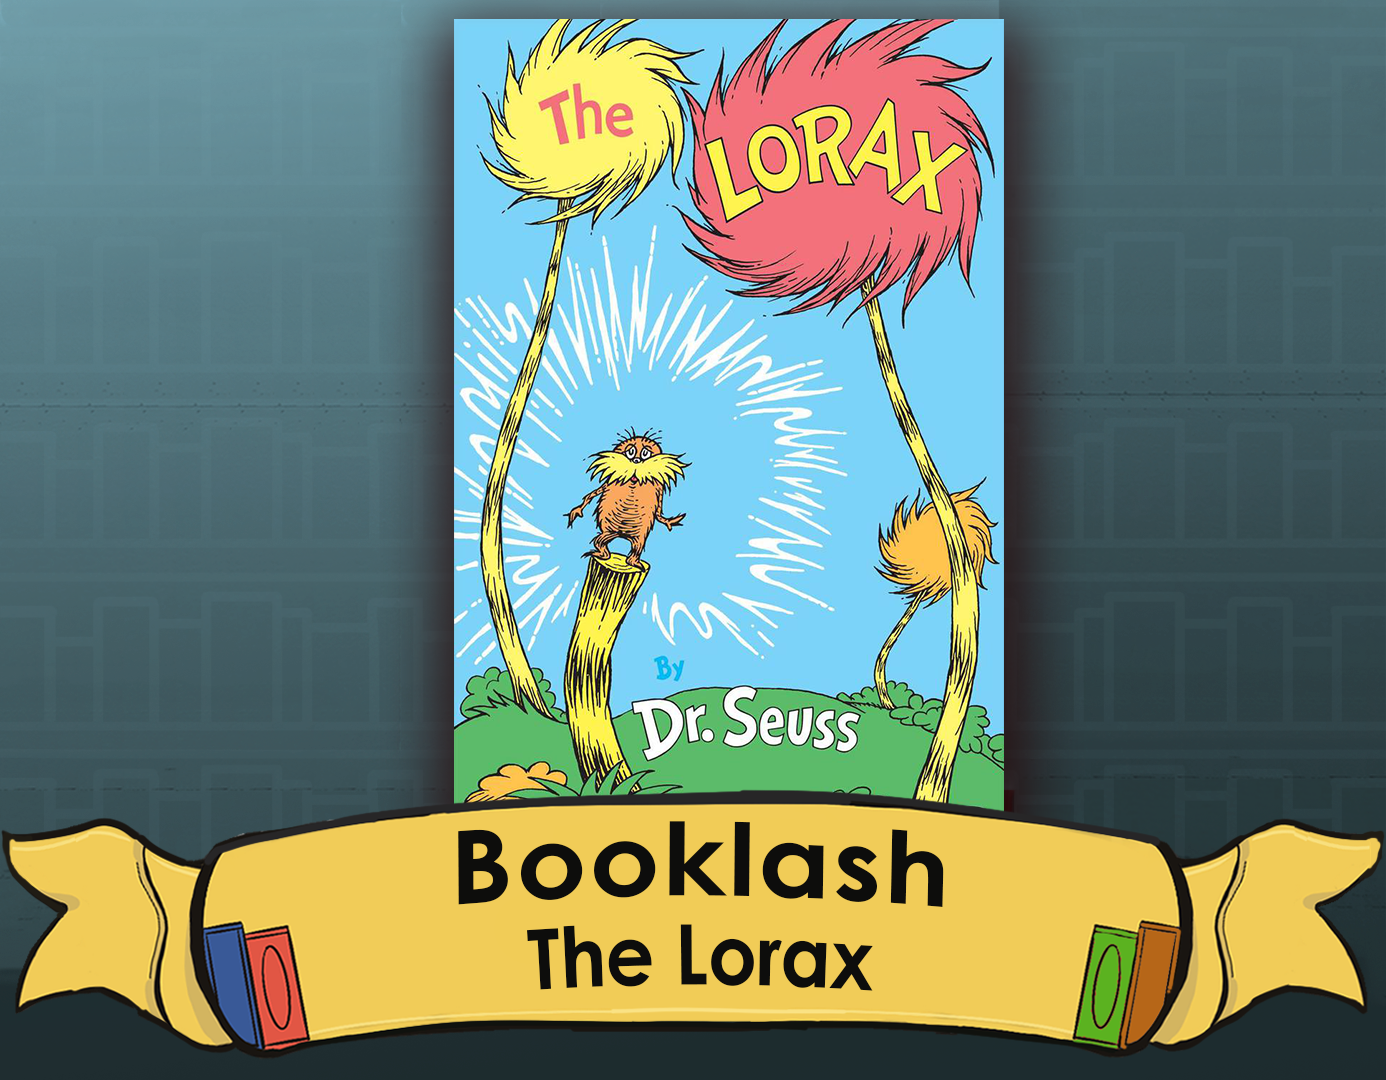 the lorax book pictures